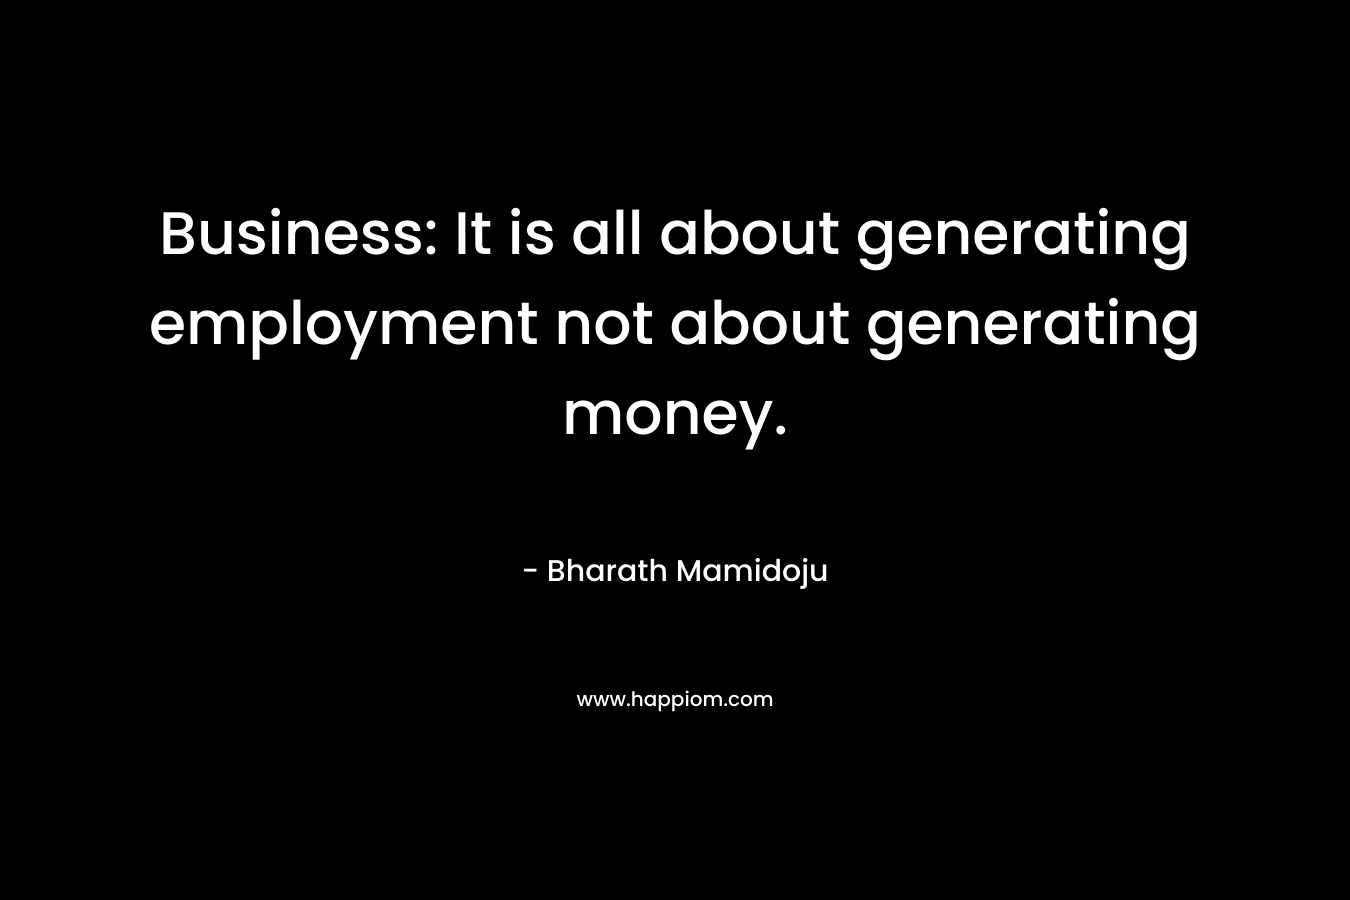 Business: It is all about generating employment not about generating money. – Bharath Mamidoju